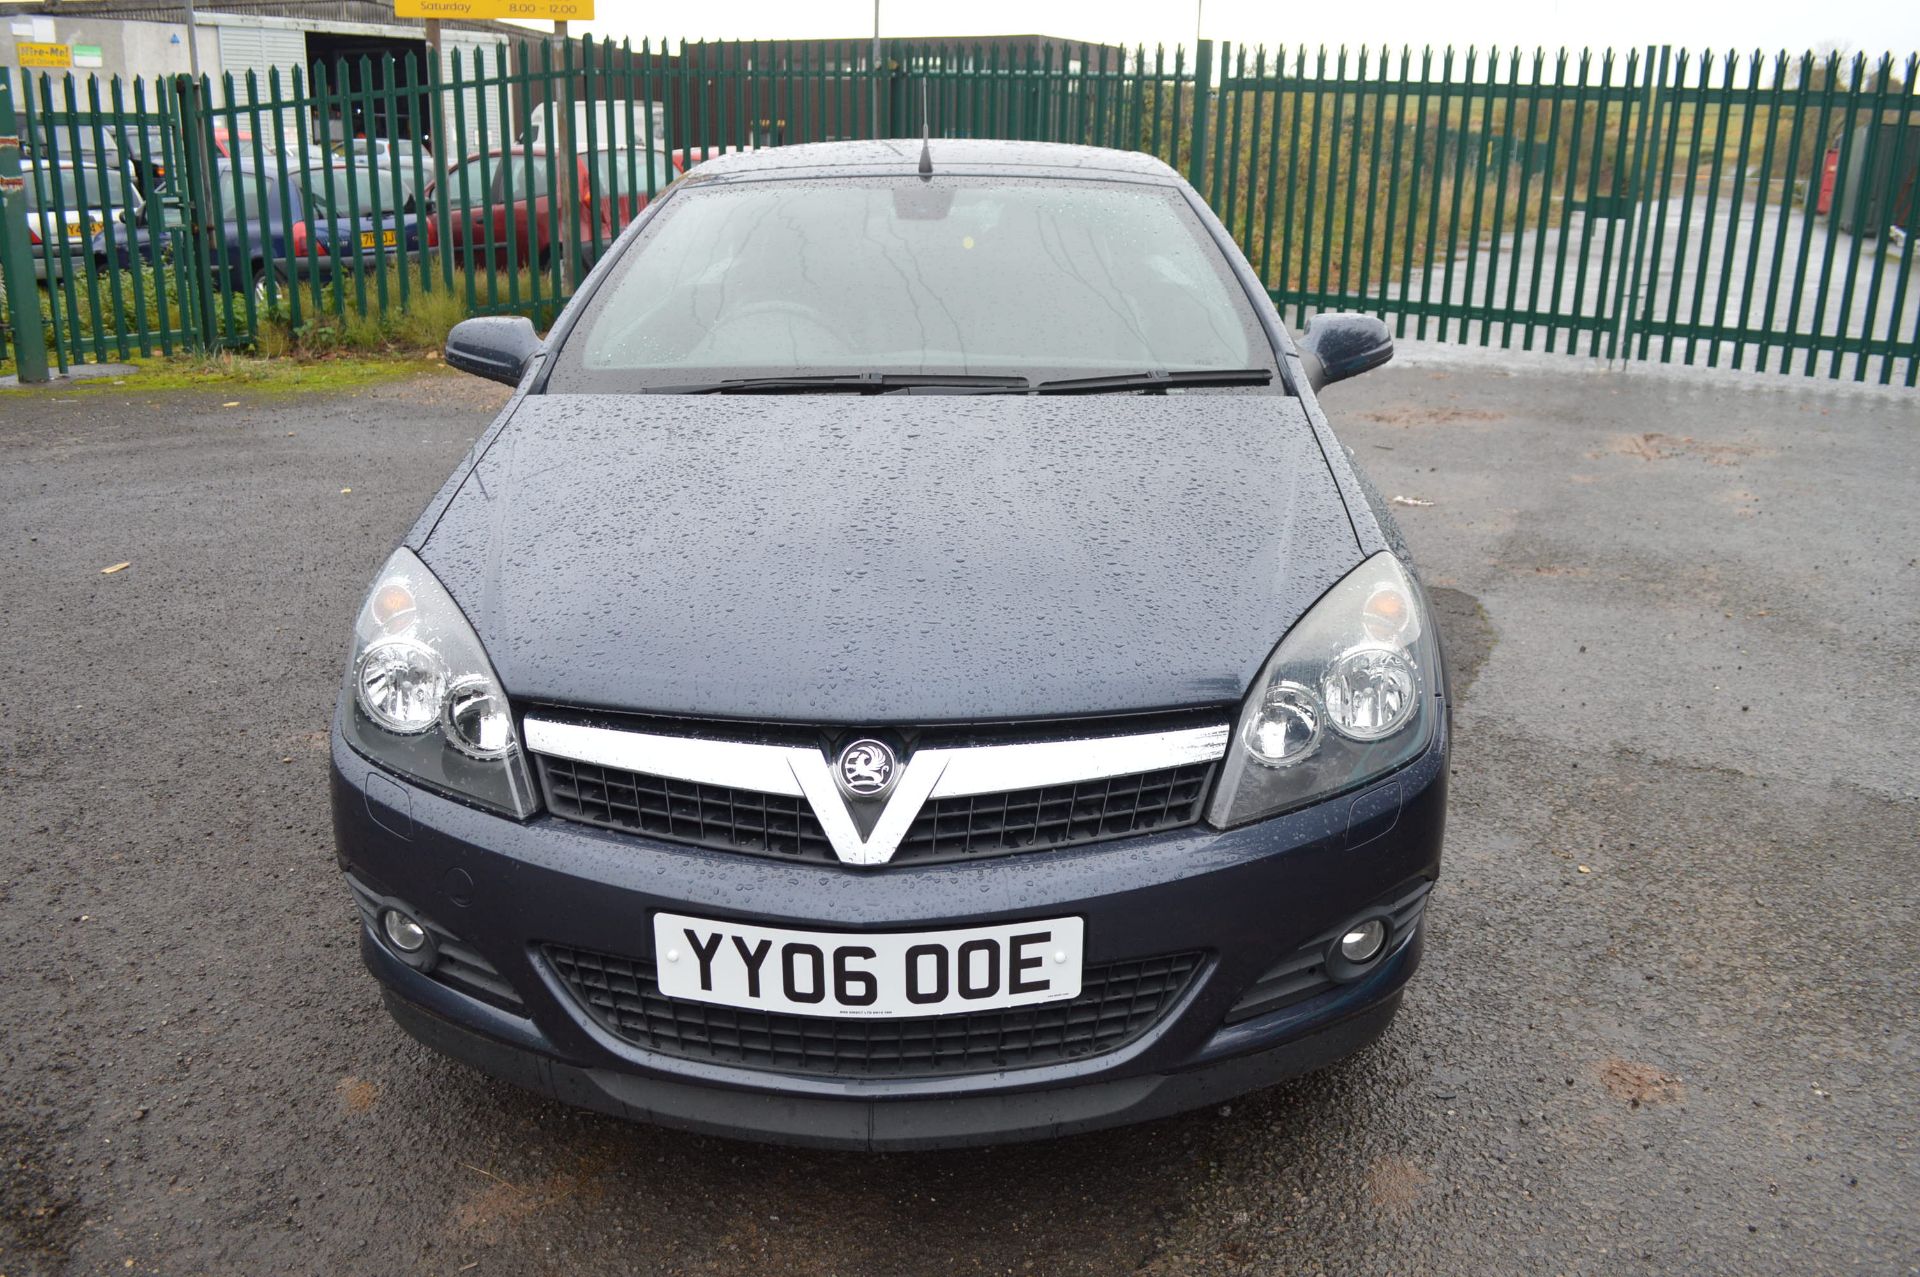 2006/06 VAUXHALL ASTRA DESIGN 1.8 SPORT TWIN TOP CONVERTIBLE, ONLY 62K MILES WARRANTED, MOT FEB 2017 - Image 3 of 33